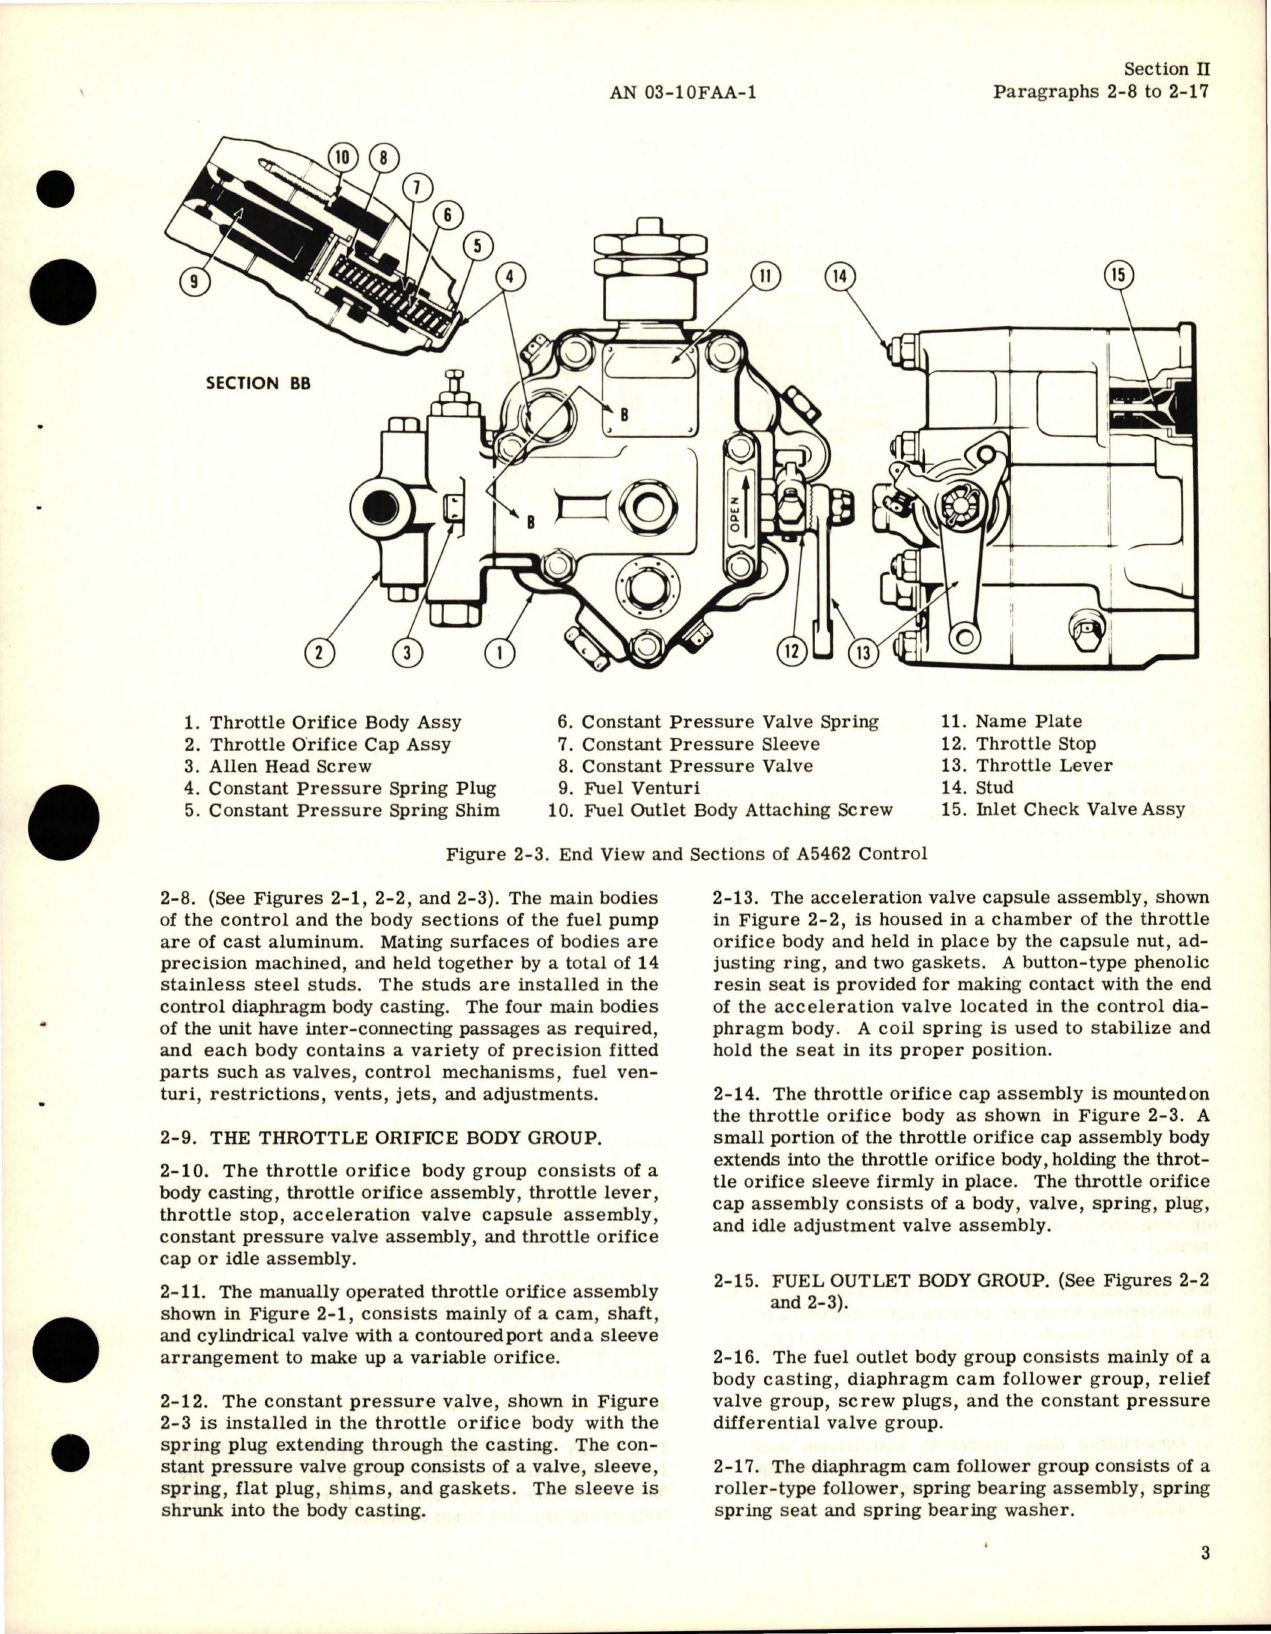 Sample page 7 from AirCorps Library document: Overhaul Instructions for Fuel Control - Model A5462, and Emergency Fuel Pump